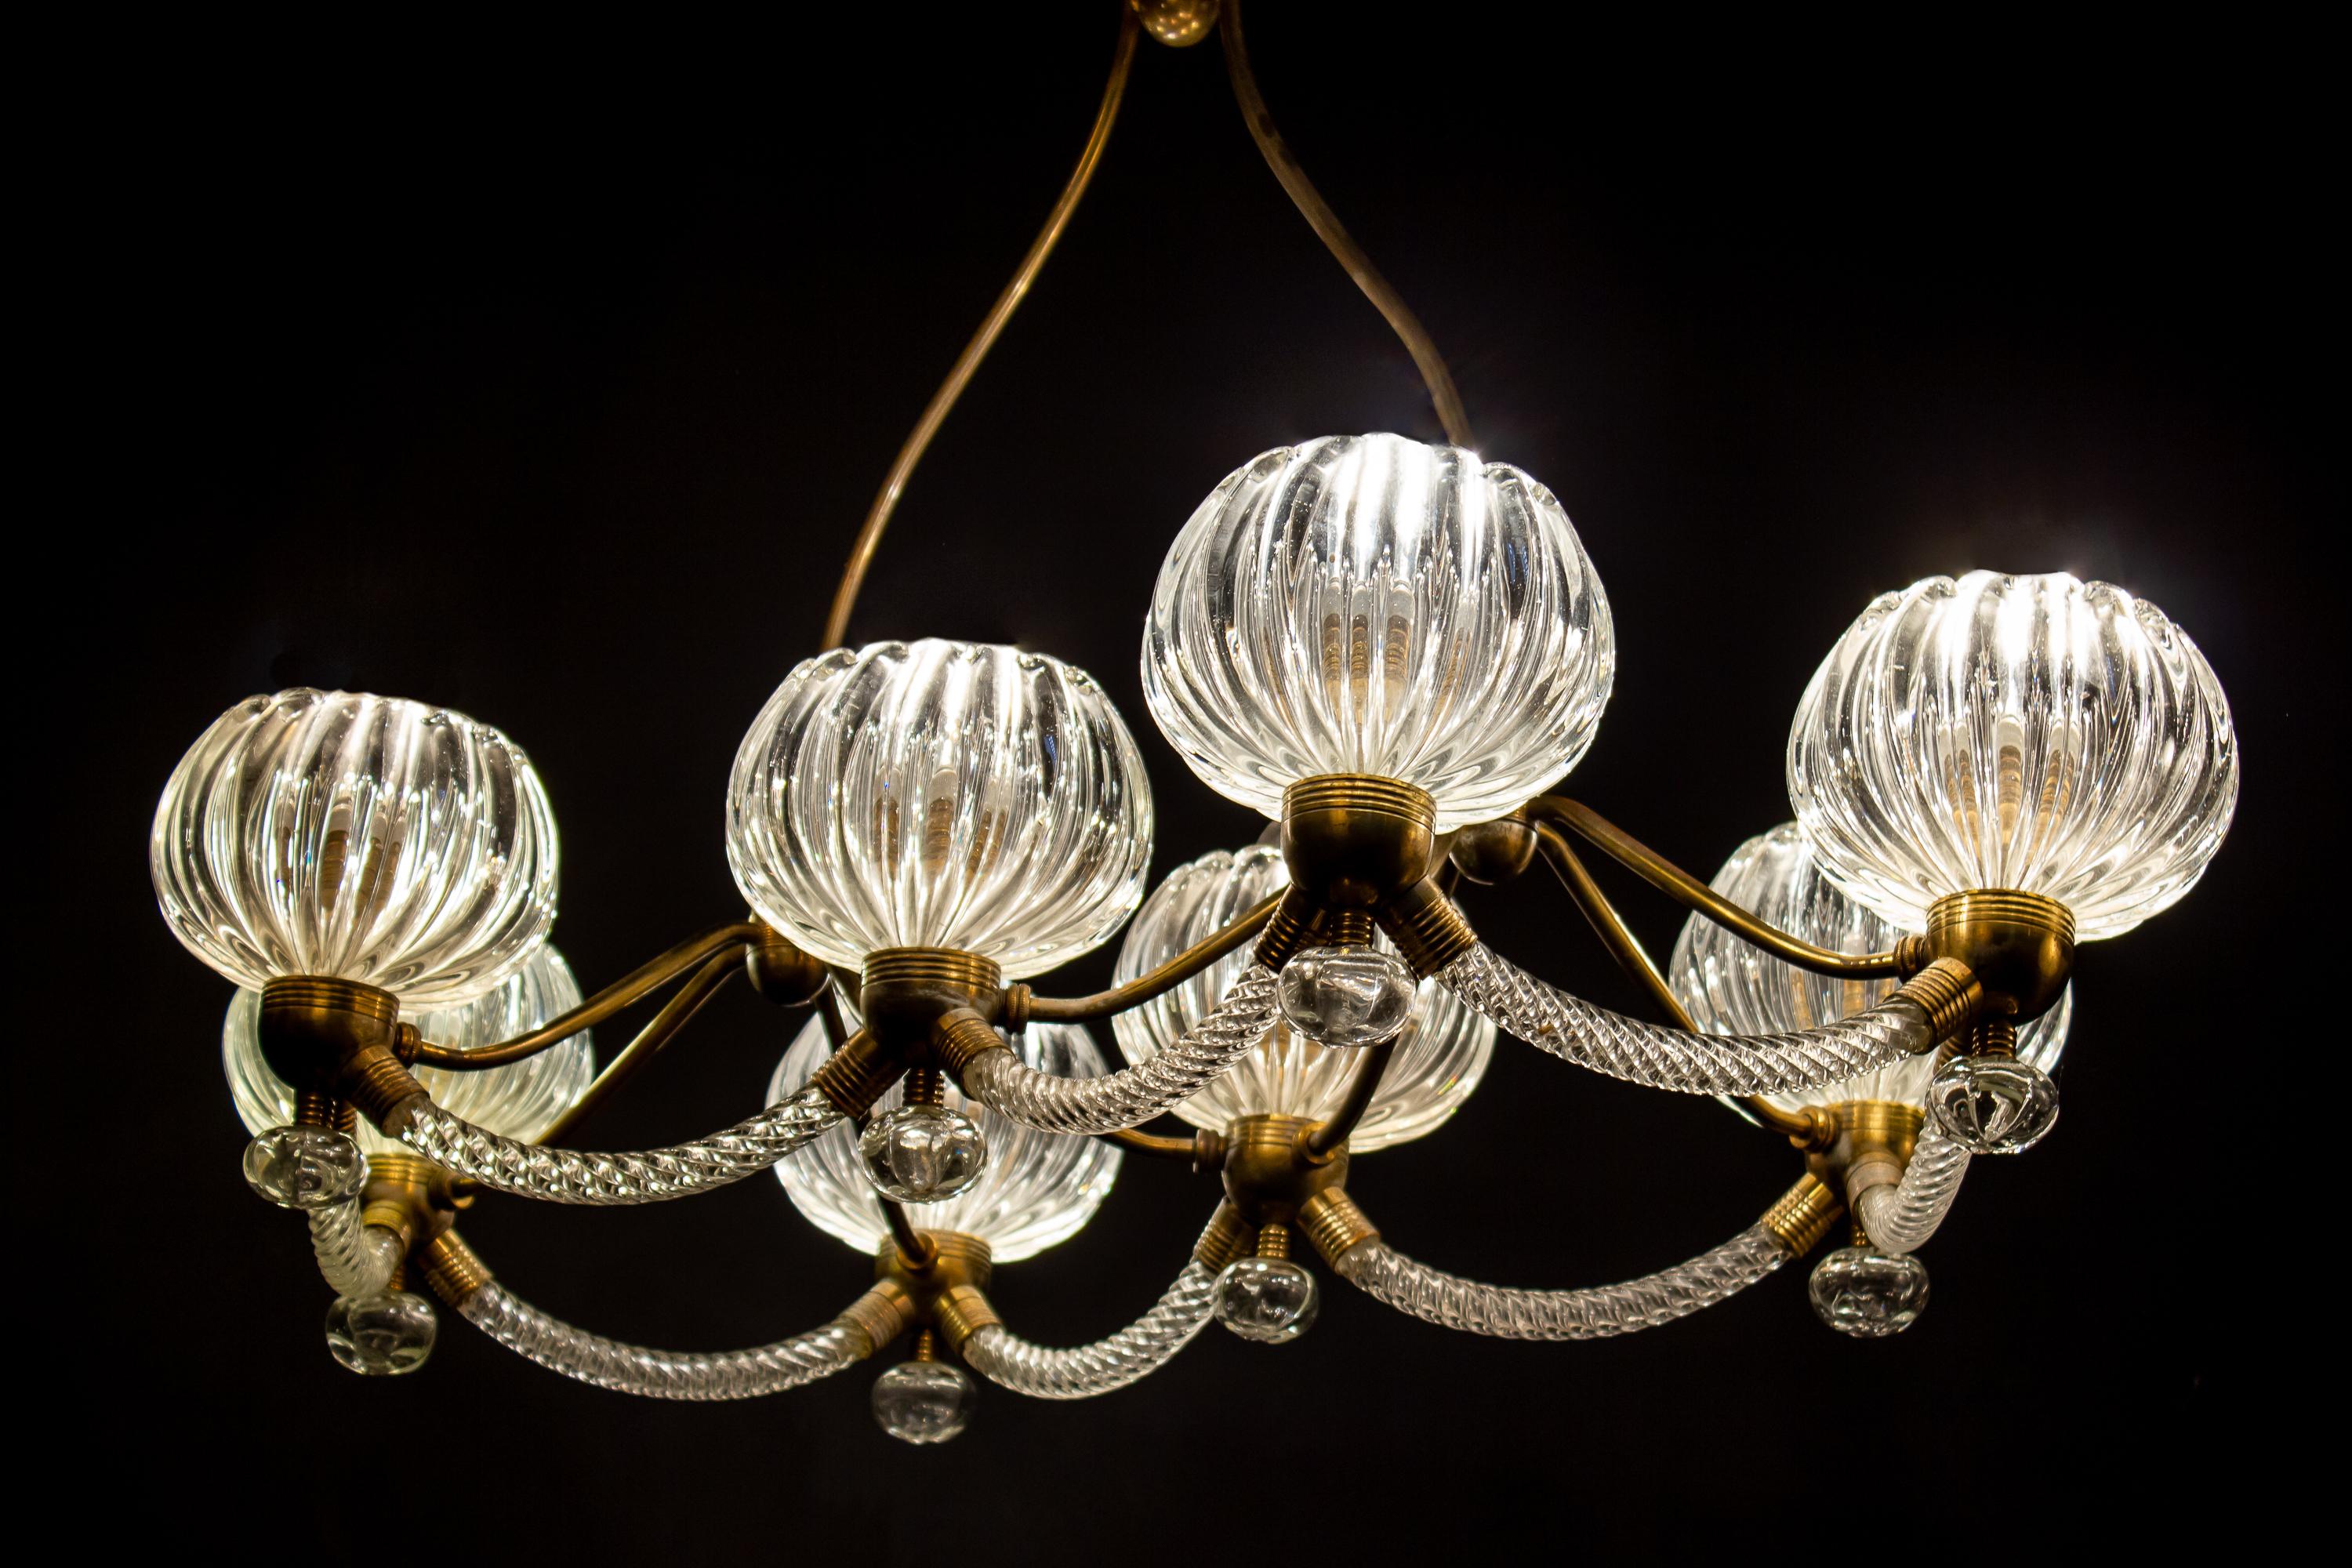 Exceptional eight -shade Murano glass chandelier with elegant shaped brass mount, by Ercole Barovier.
Excellent vintage condition.
Eight E 27 light bulbs compatible with US standards.